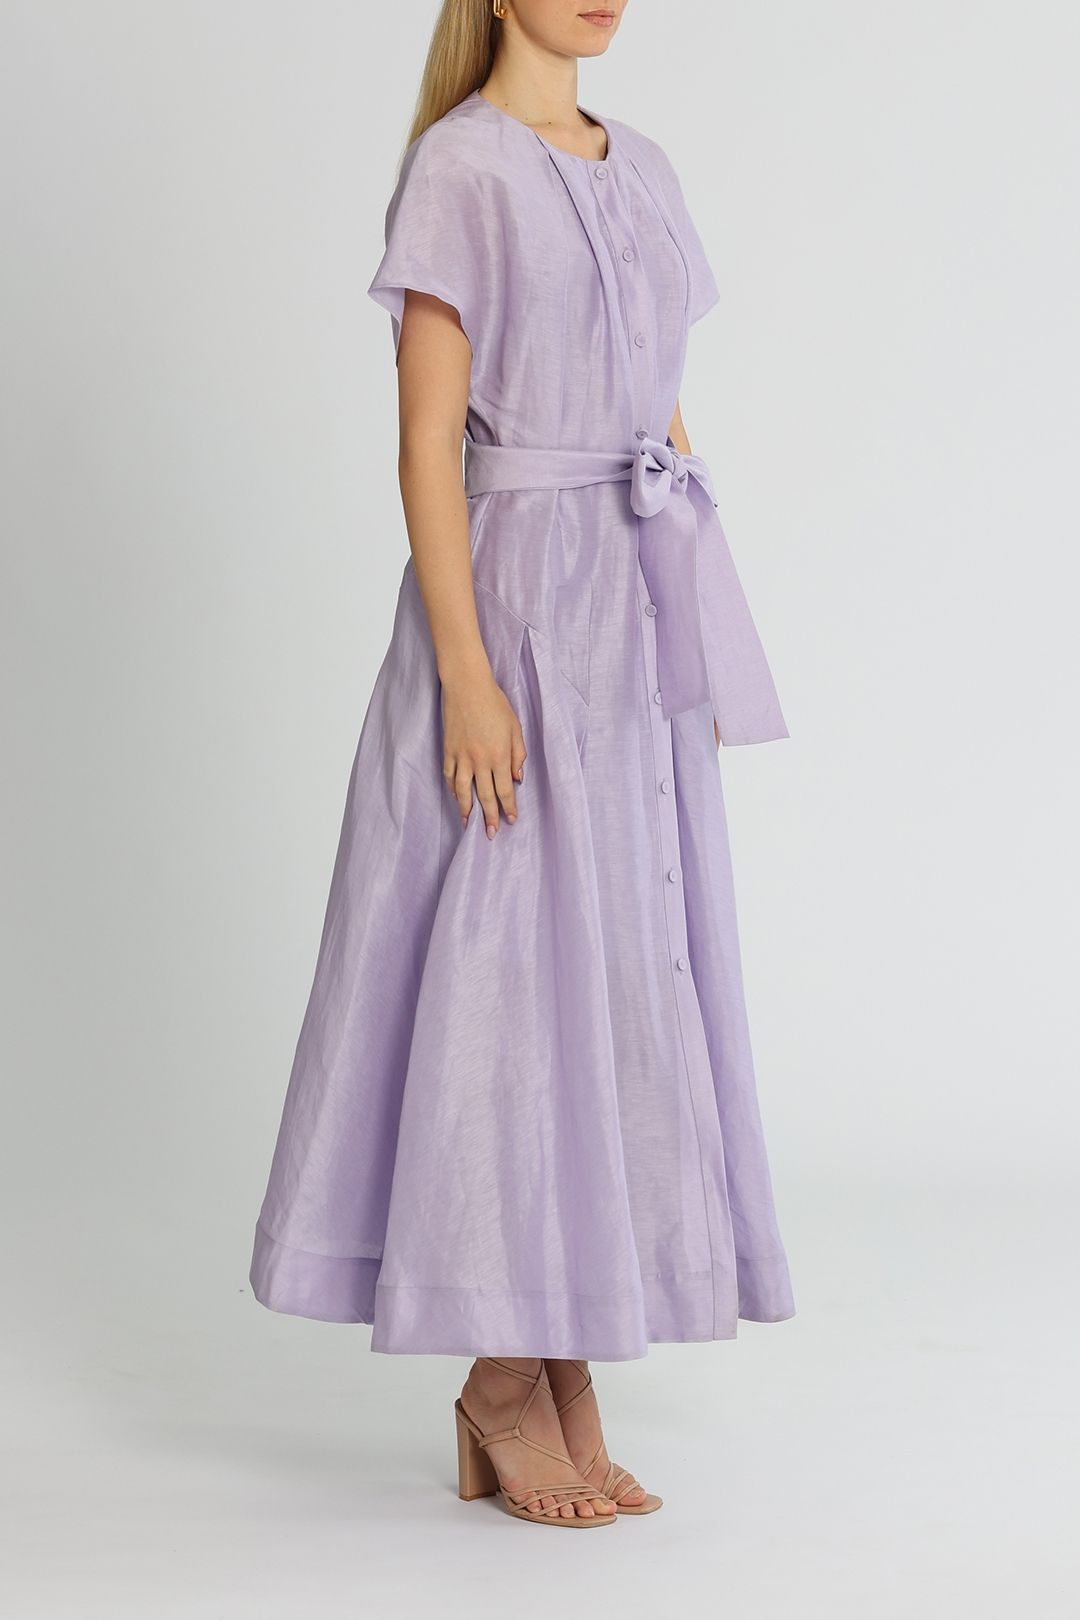 Ginger and Smart Infinite Galaxies Dress Lilac